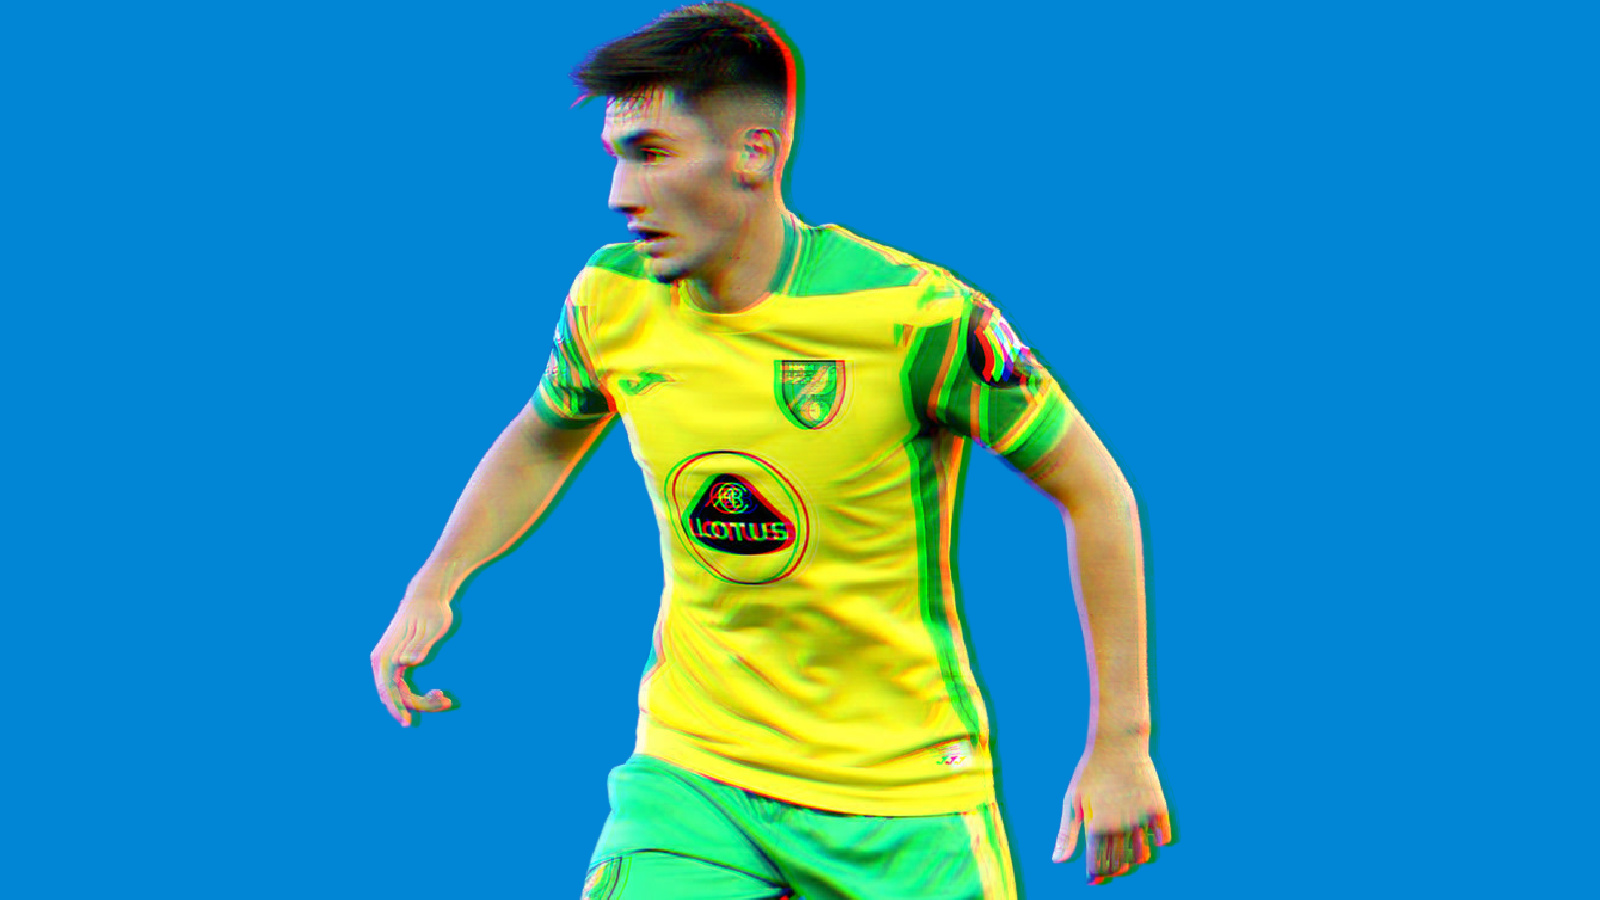 Watch: Billy Gilmour shows early spark with hairsplitting pre-assist for Norwich